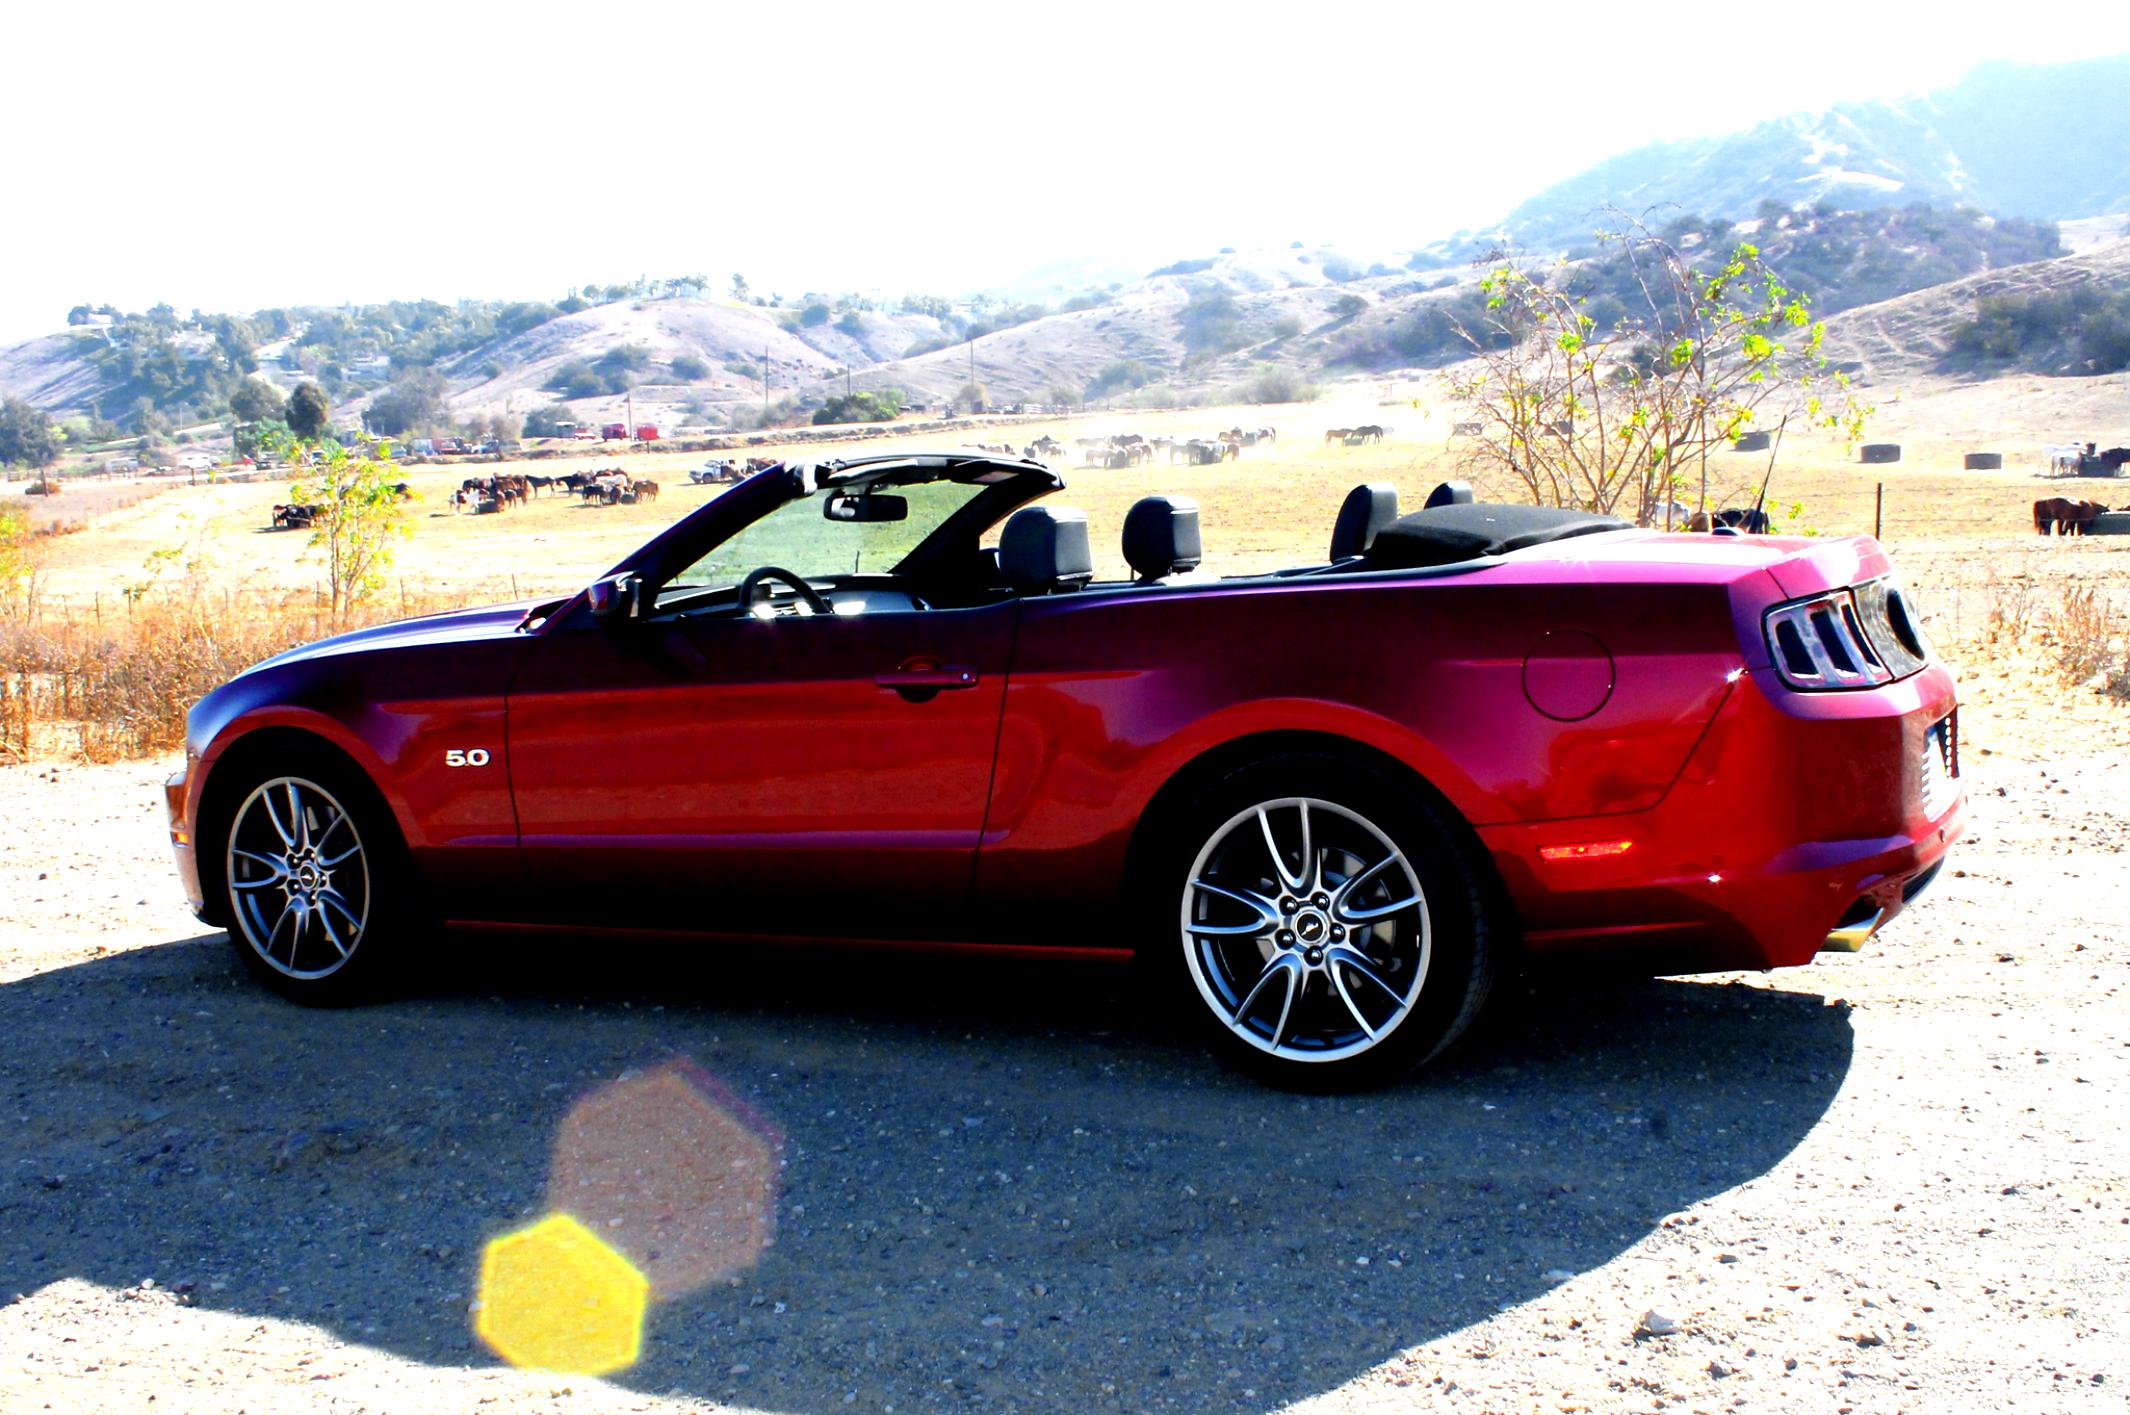 Ford Mustang Convertible 2014 #14